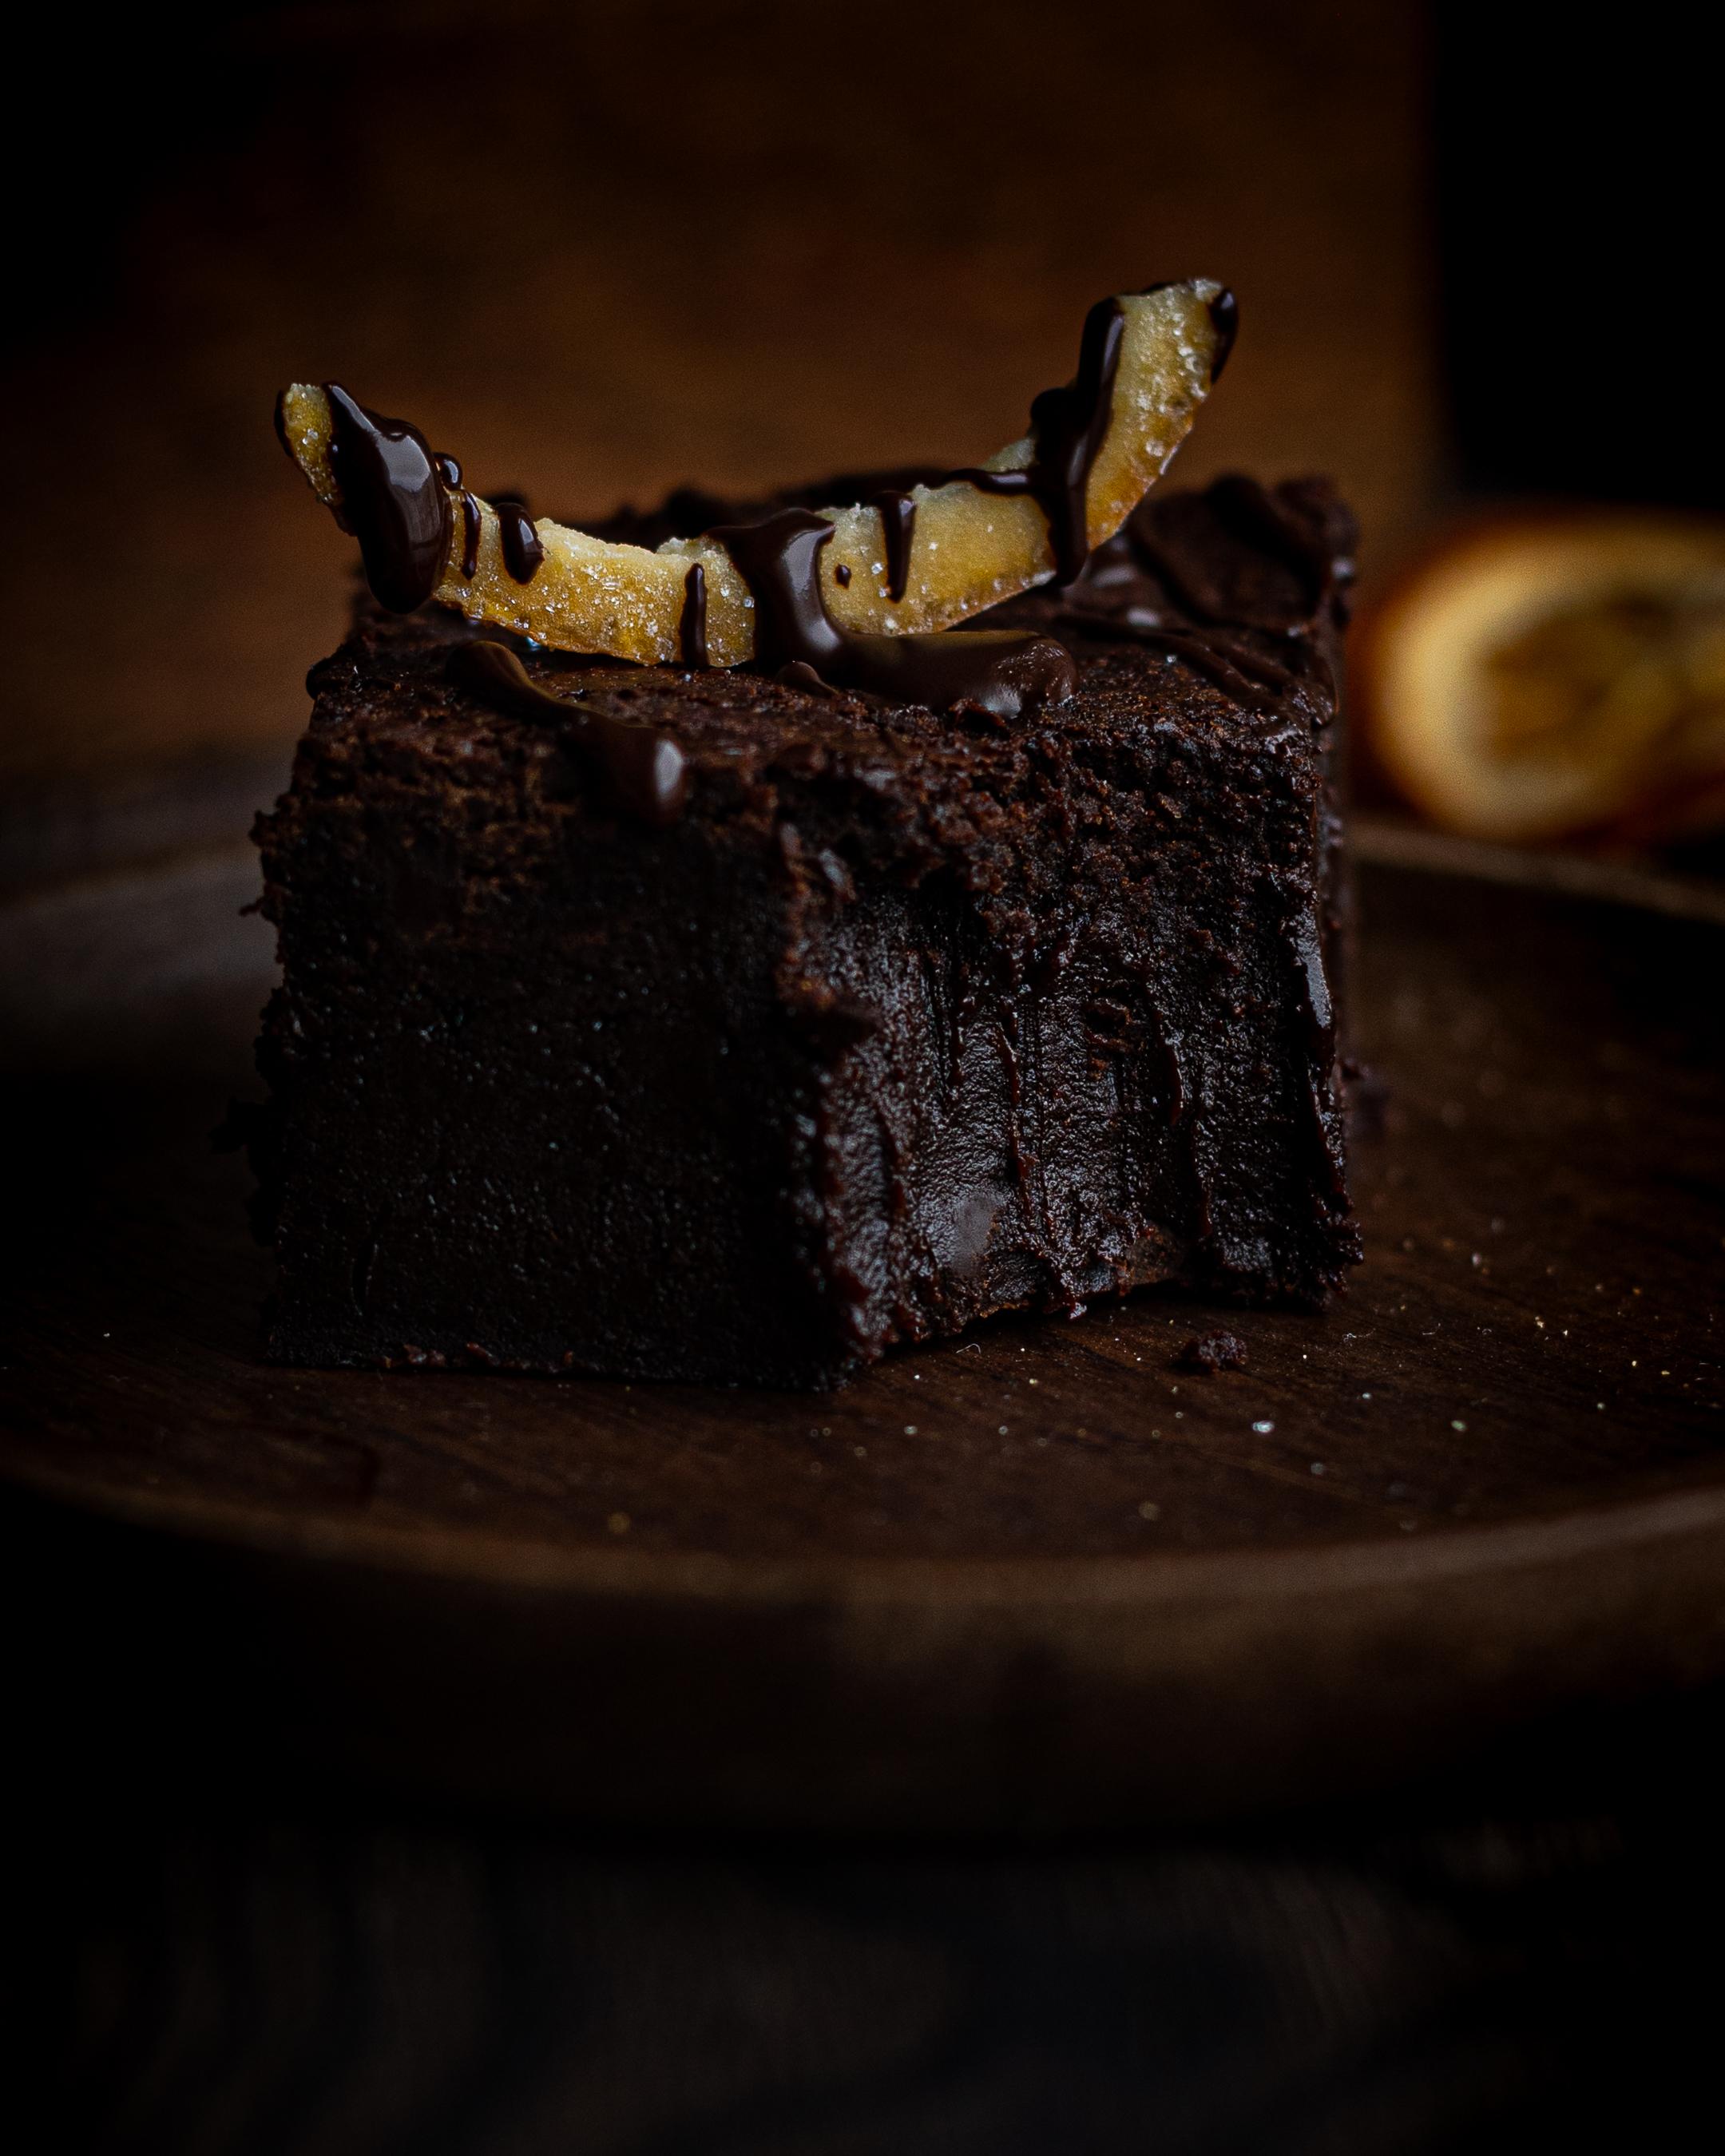 a single chocolate orange brownie with a bite taken out, teethmarks showing in the gooey centre of the brownie. Topped with a candied orange crown. Dried oranges in background